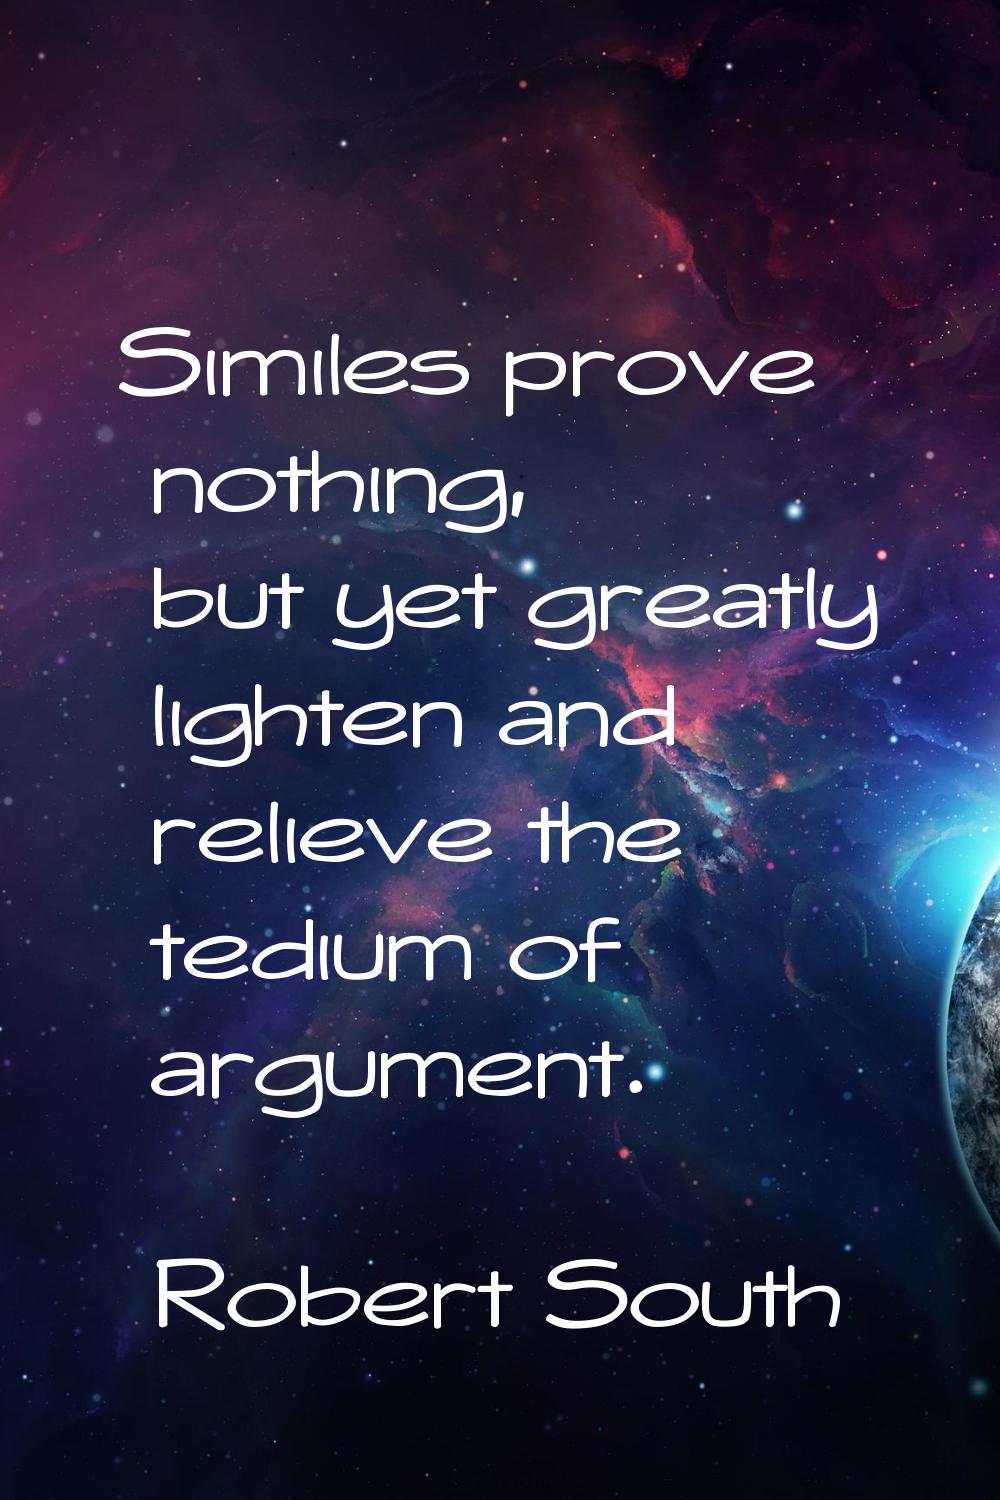 Similes prove nothing, but yet greatly lighten and relieve the tedium of argument.